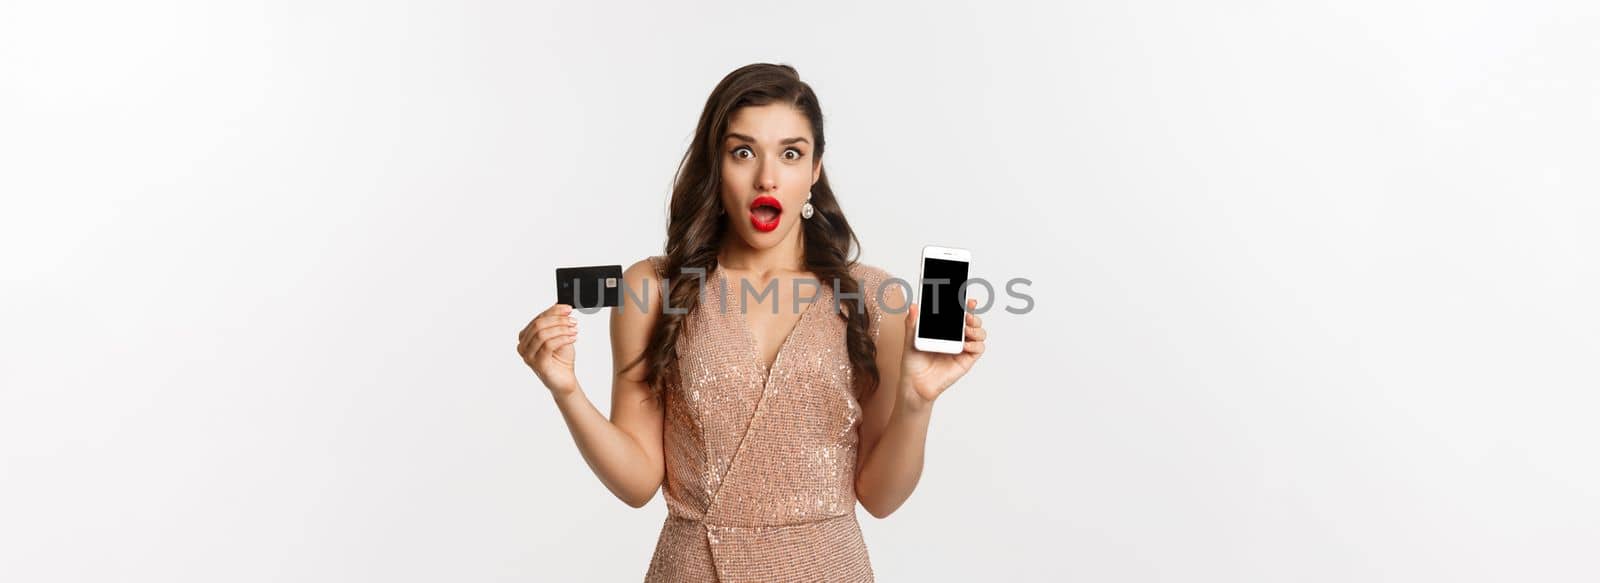 Online shopping and holidays concept. Woman looking amazed and showing credit card with smartphone screen, standing over white background.